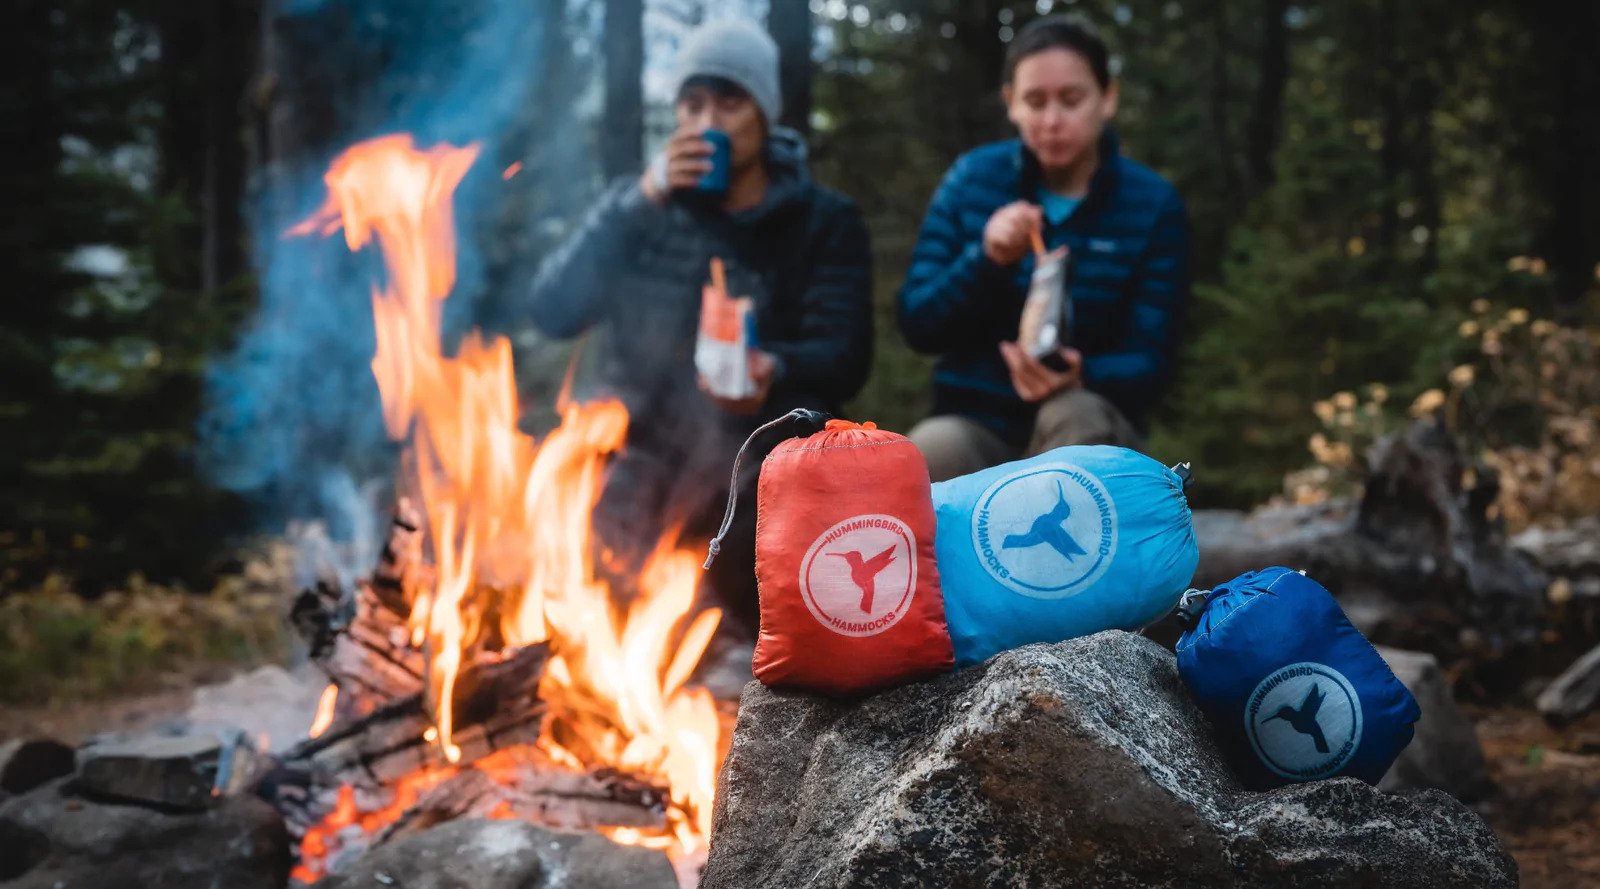 Three ultralight Single Plus Hammocks sitting nearby a campfire in the forest with people in the background eating a meal